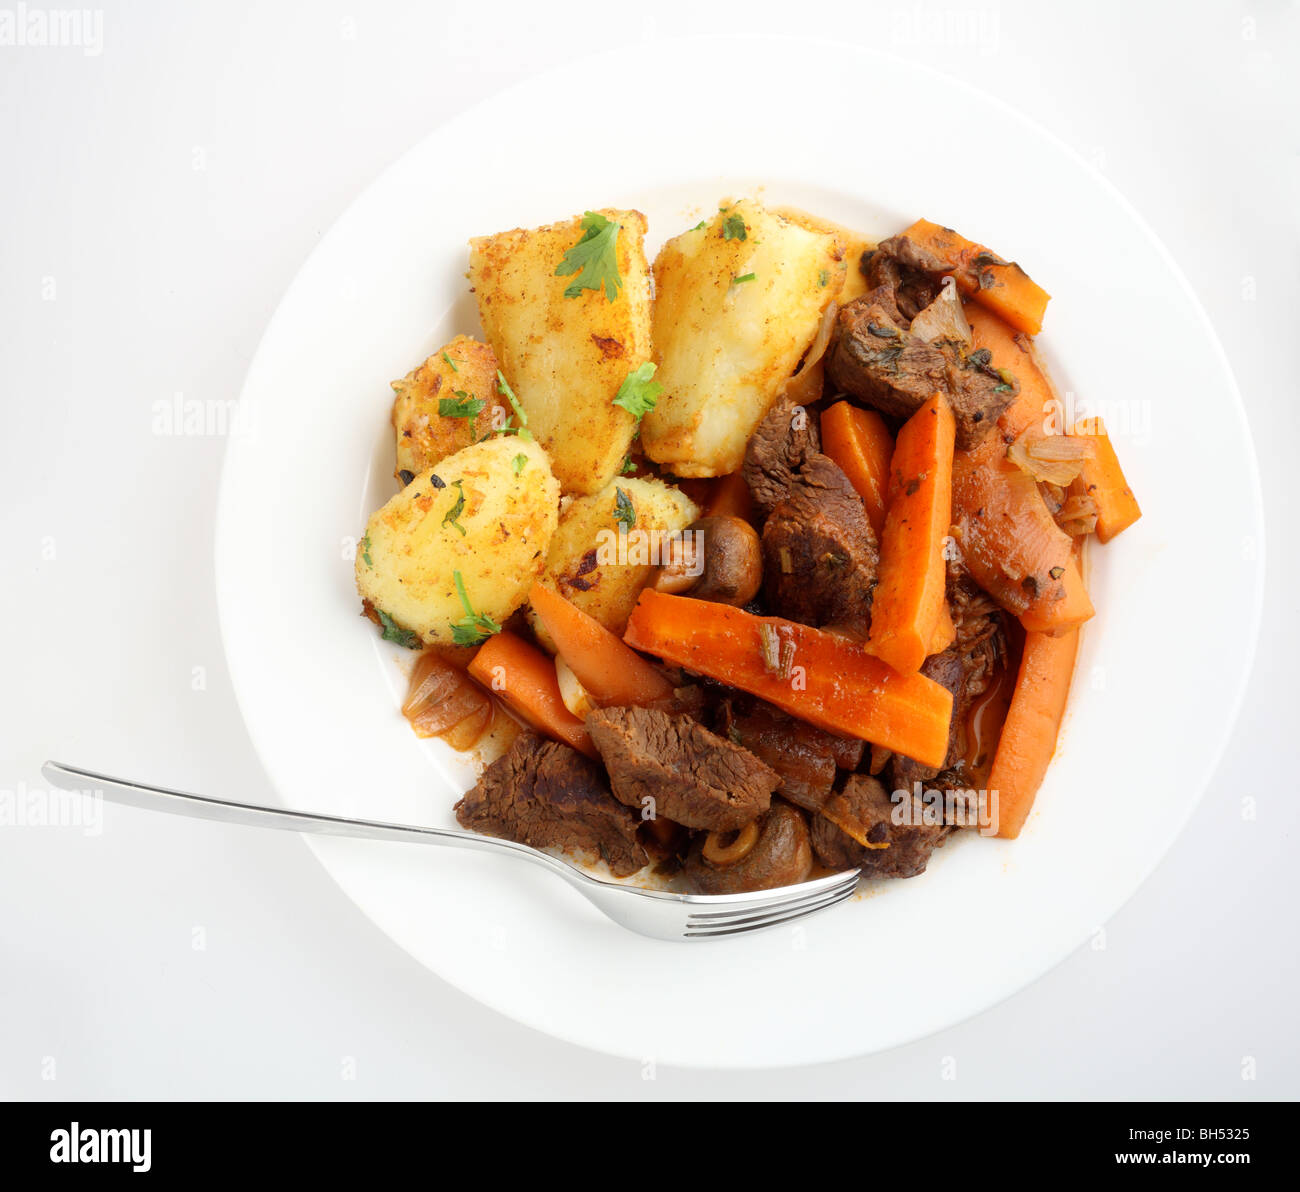 Top view of a plate of beef and carrot stew with a fork Stock Photo